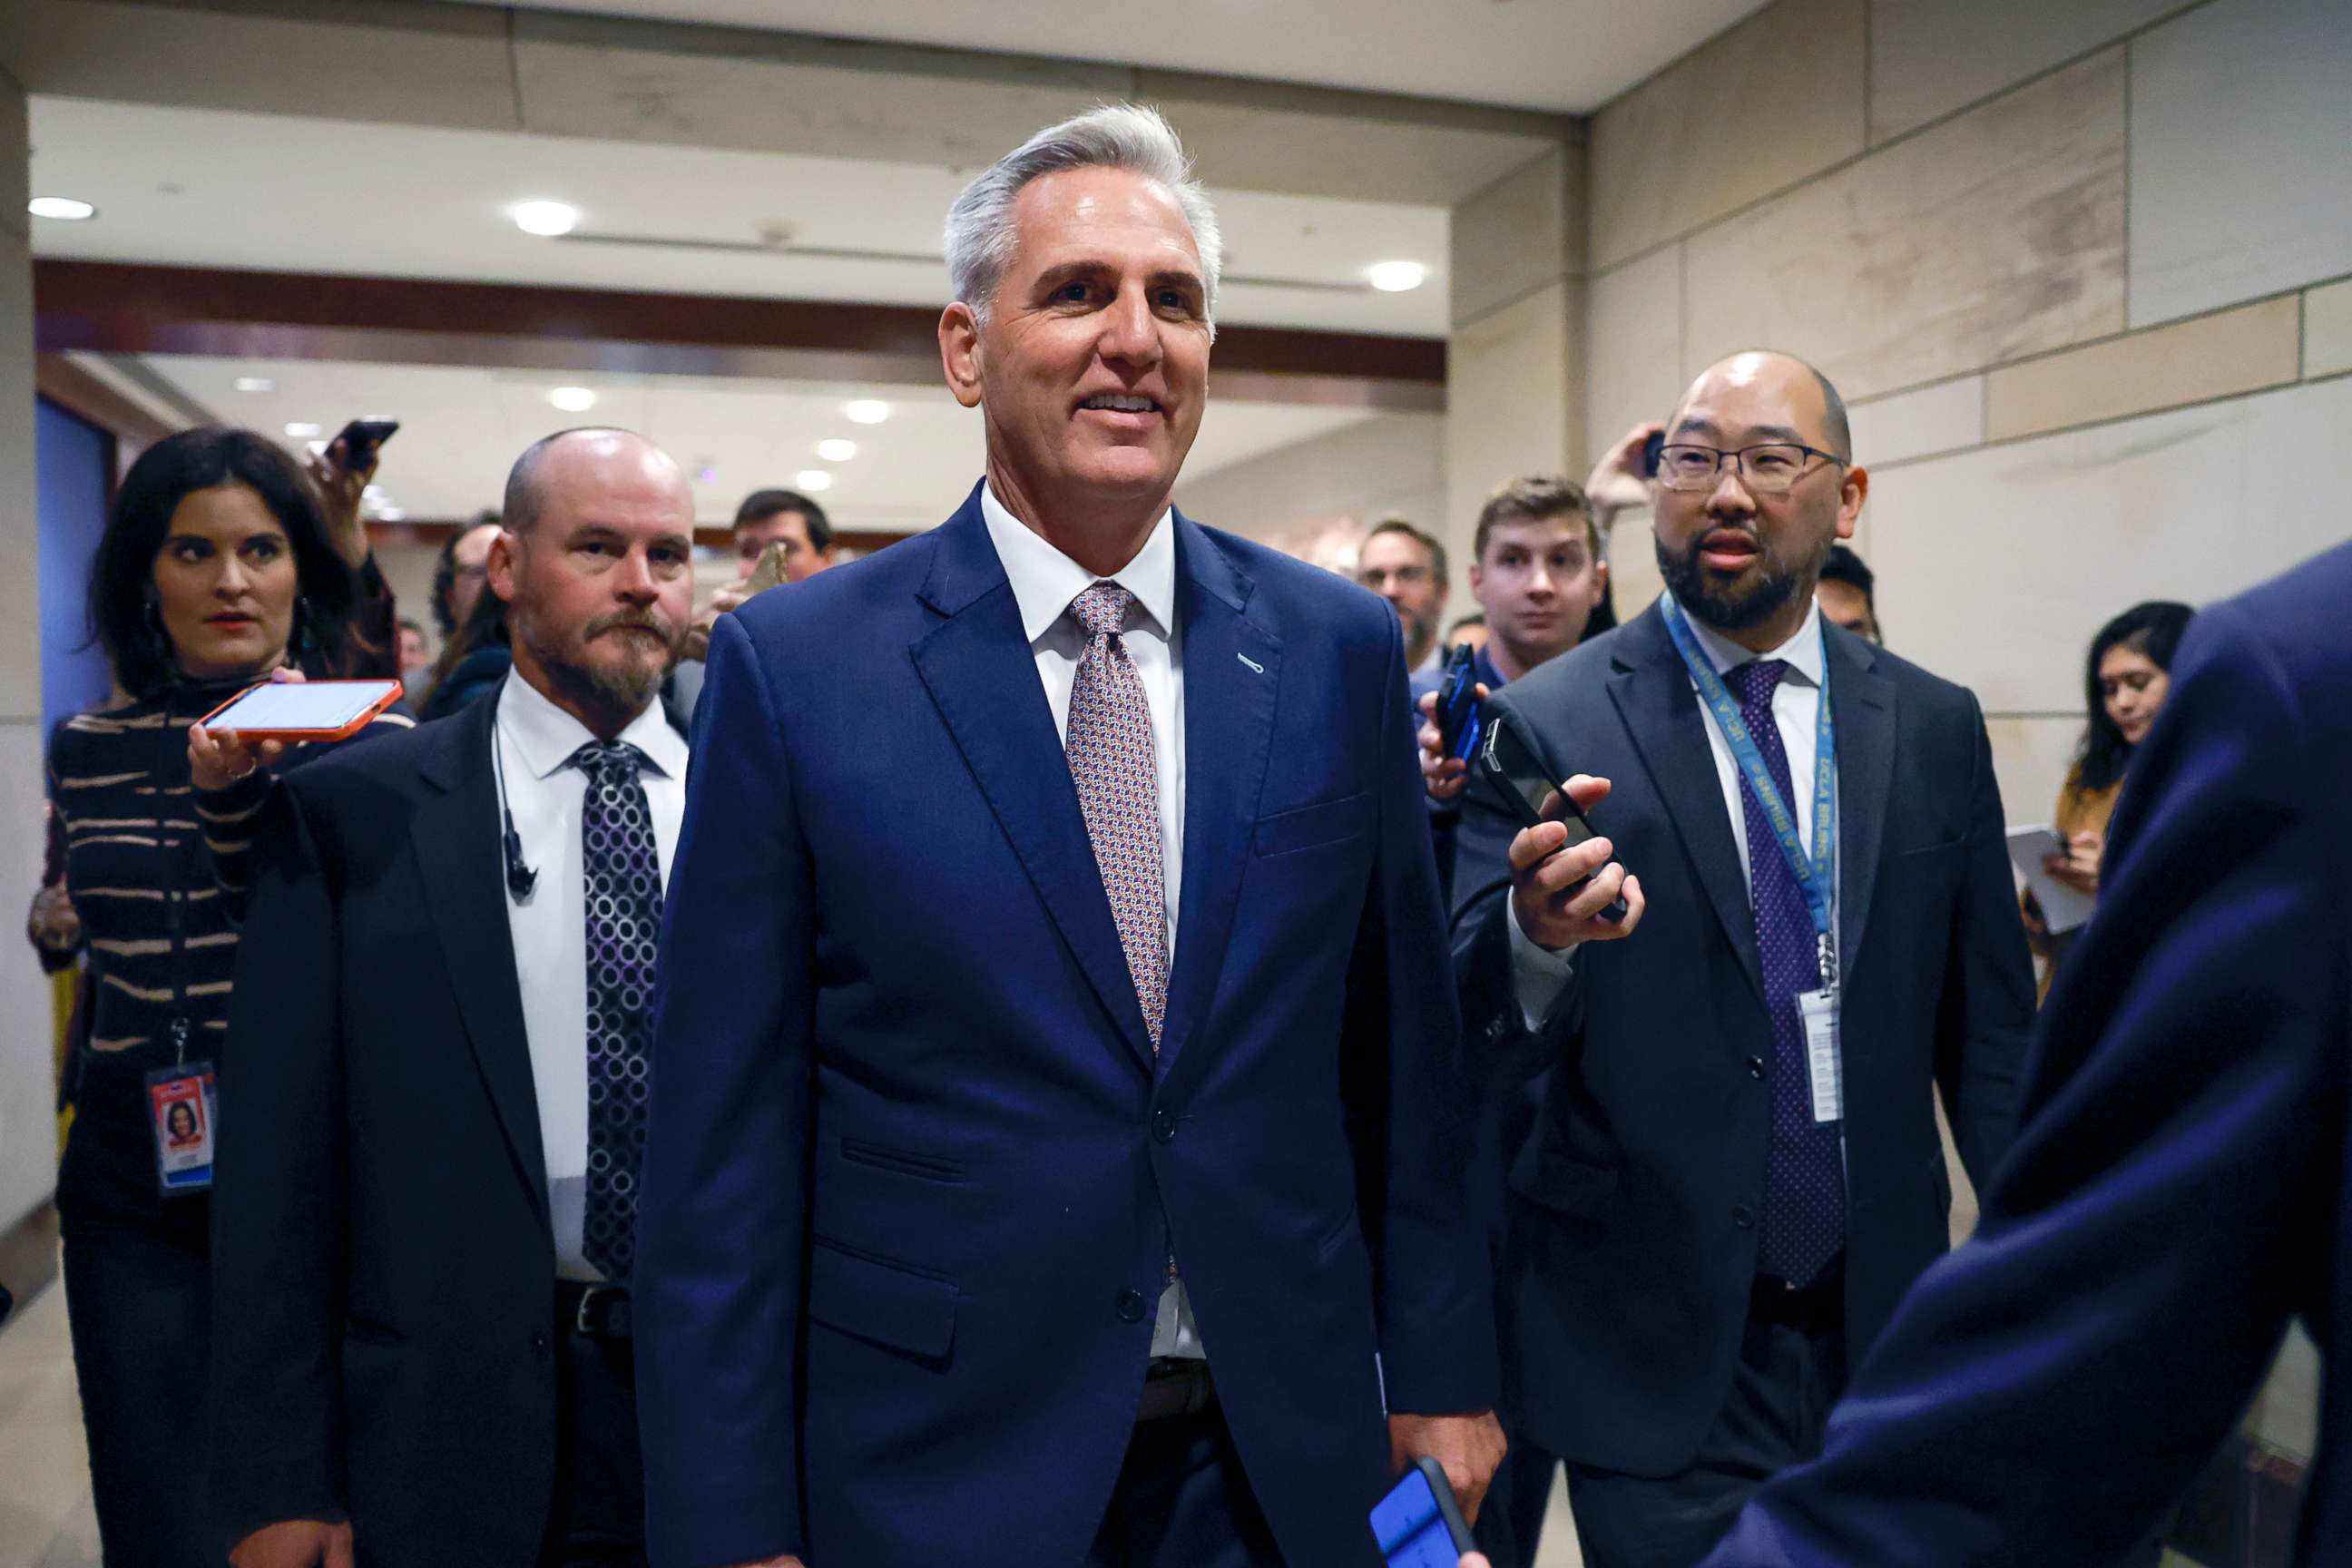 PHOTO: House Minority Leader Kevin McCarthy, R-Calif., is followed by reporters as he arrives to a House Republican Caucus meeting at the U.S. Capitol Building on Nov. 14, 2022, in Washington, D.C.